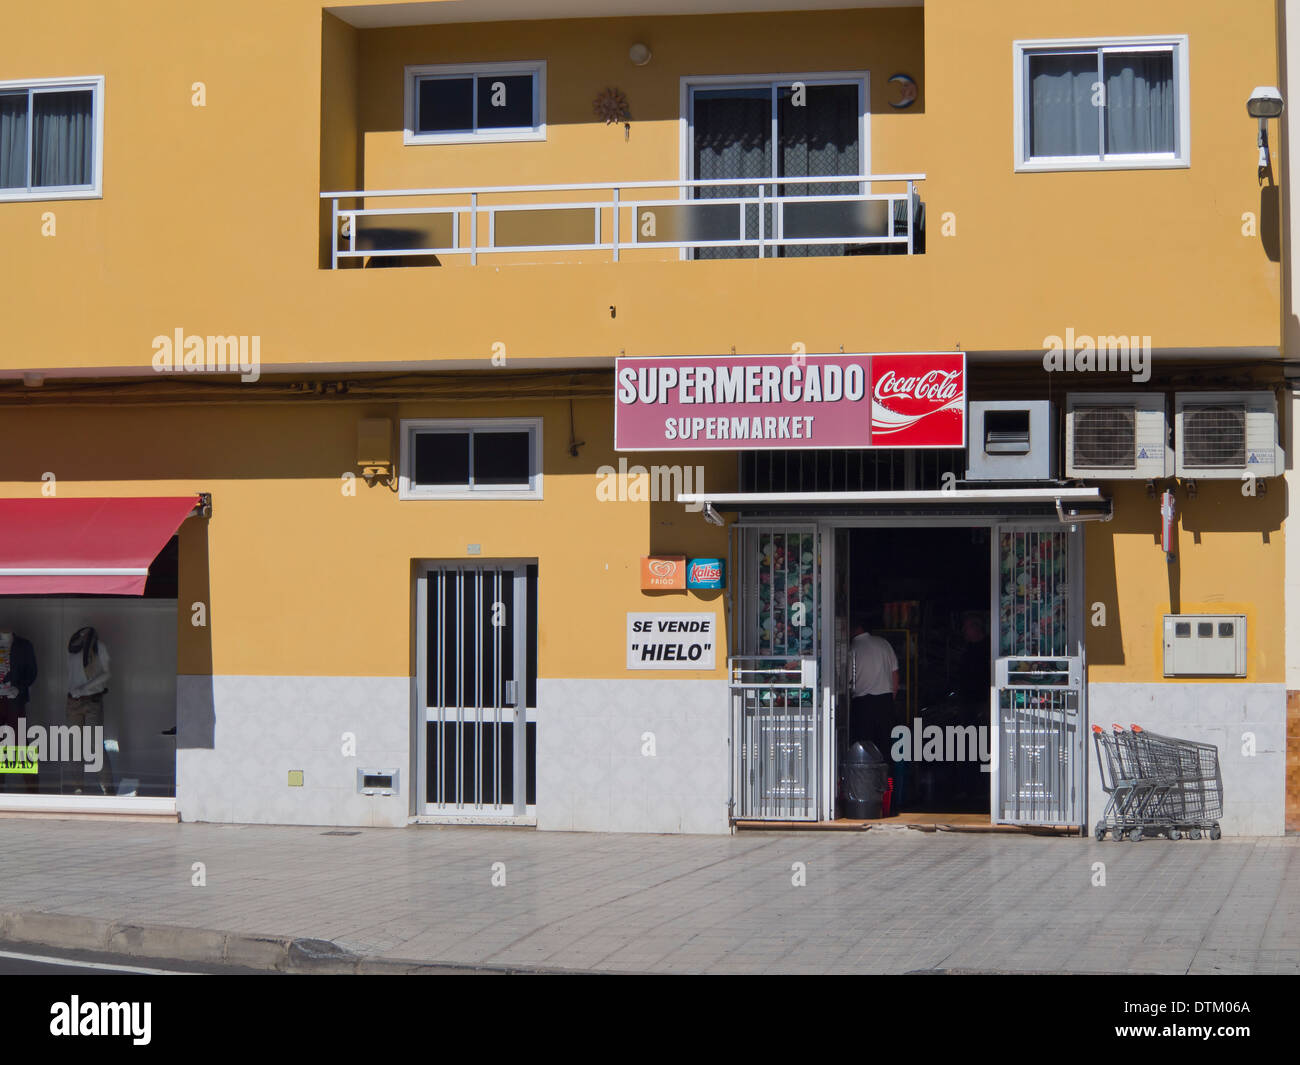 Typical small Spanish supermarket, Supermercado, in Tenerife Canary Islands Spain Stock Photo